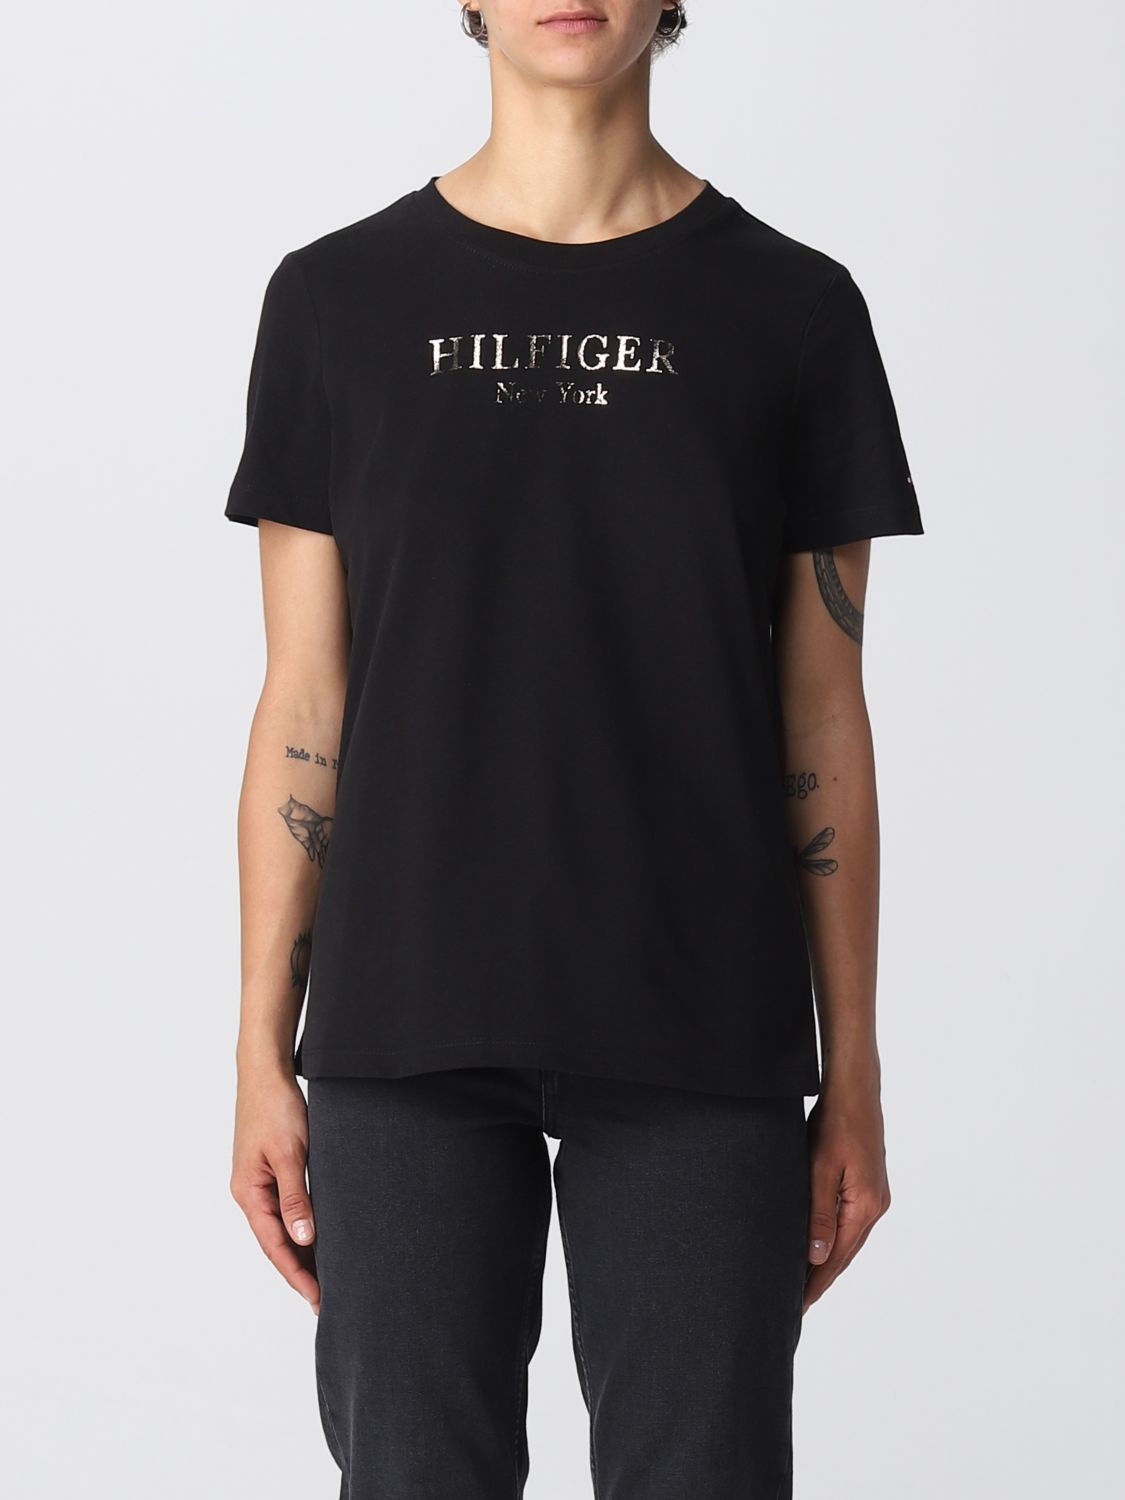 TOMMY HILFIGER: t-shirt for woman - Black | Tommy Hilfiger t-shirt online at GIGLIO.COM